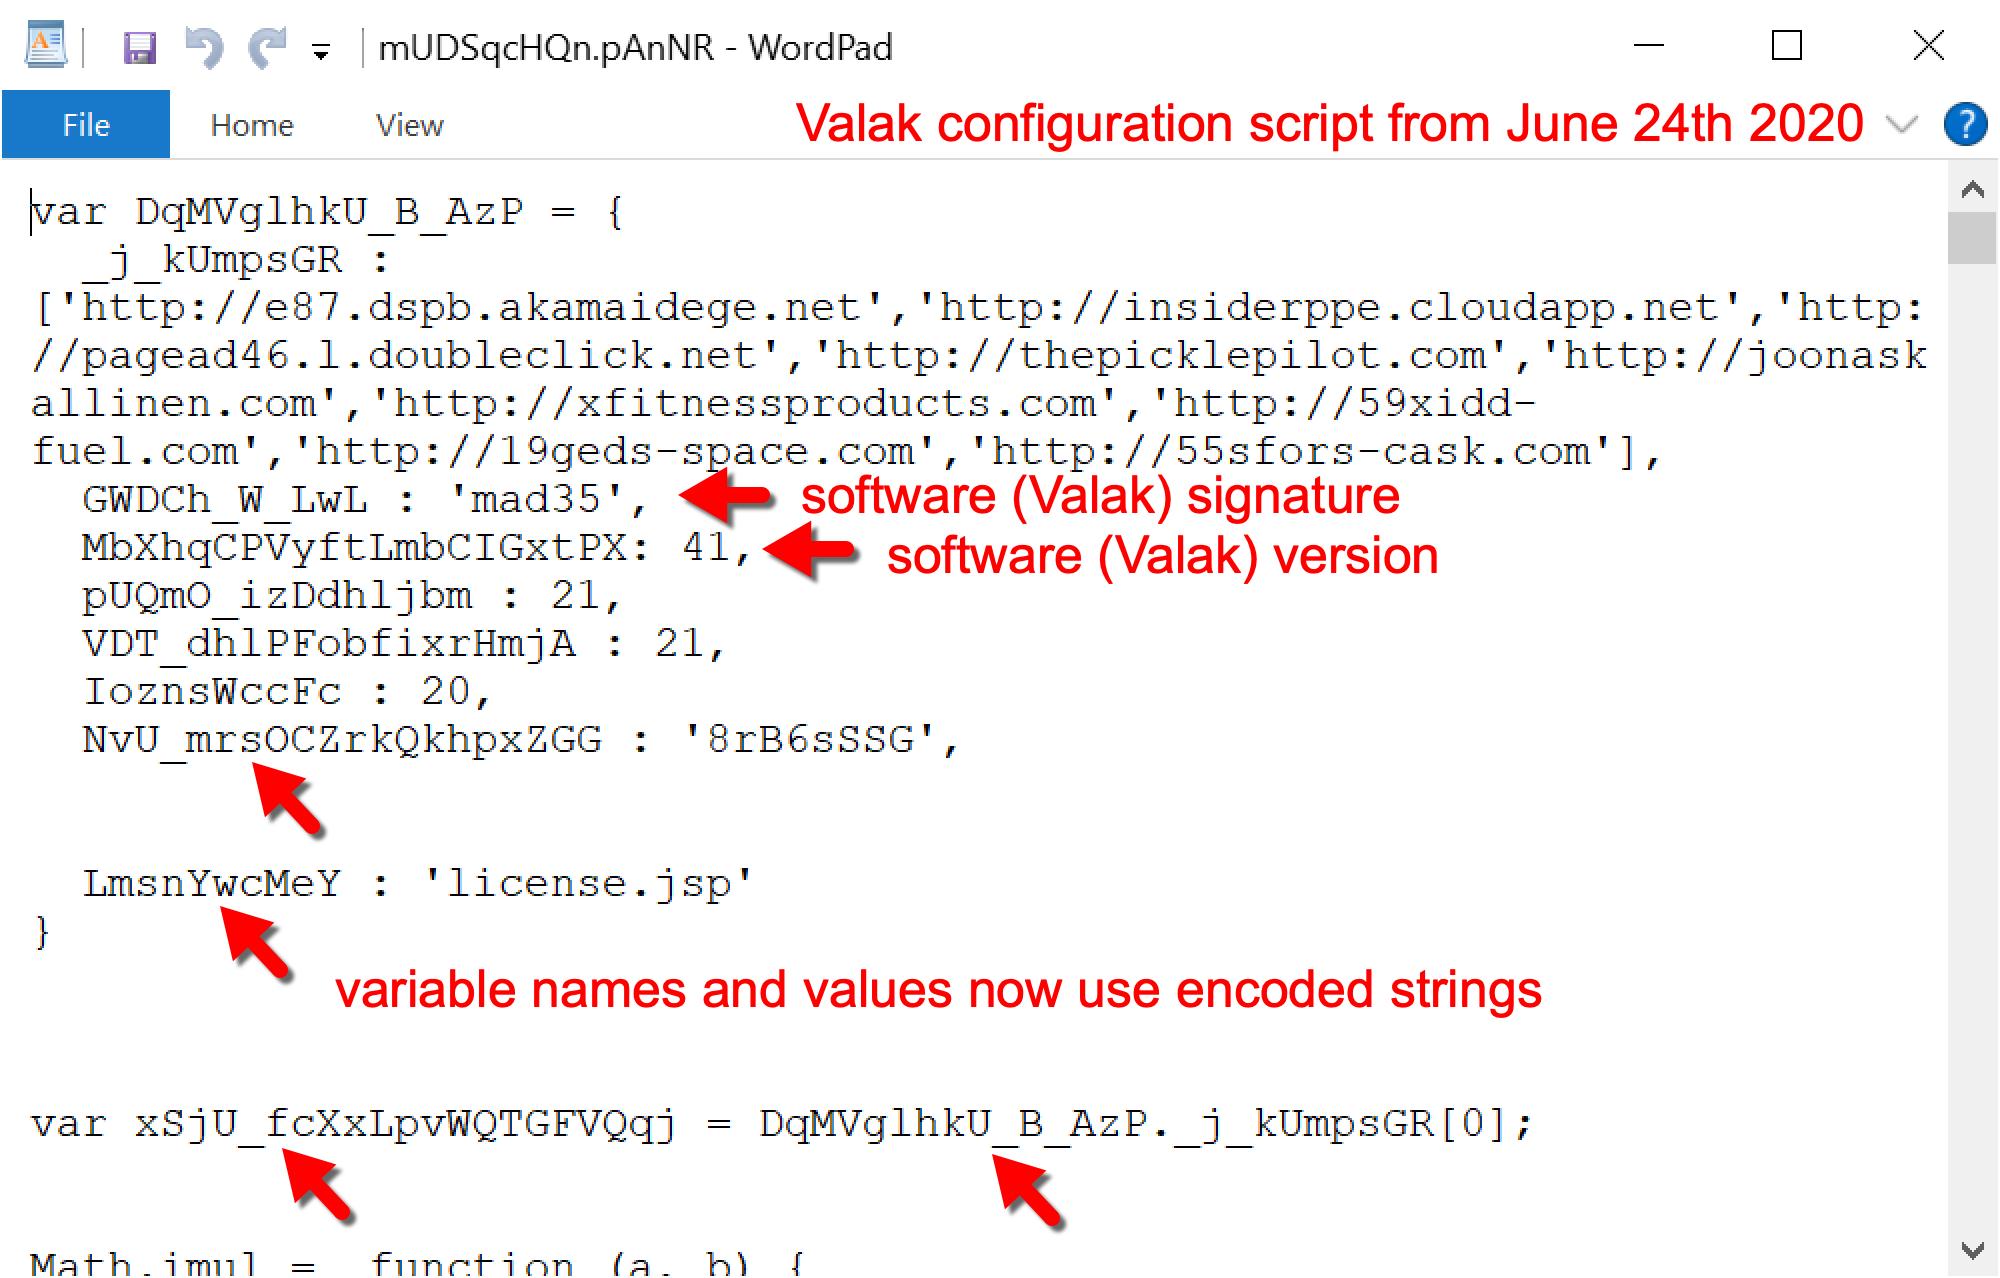 A Valak configuration script from June 24, 2020, shows software (Valak) signature, software (Valak) version, and variable names and values now using encoded strings. 